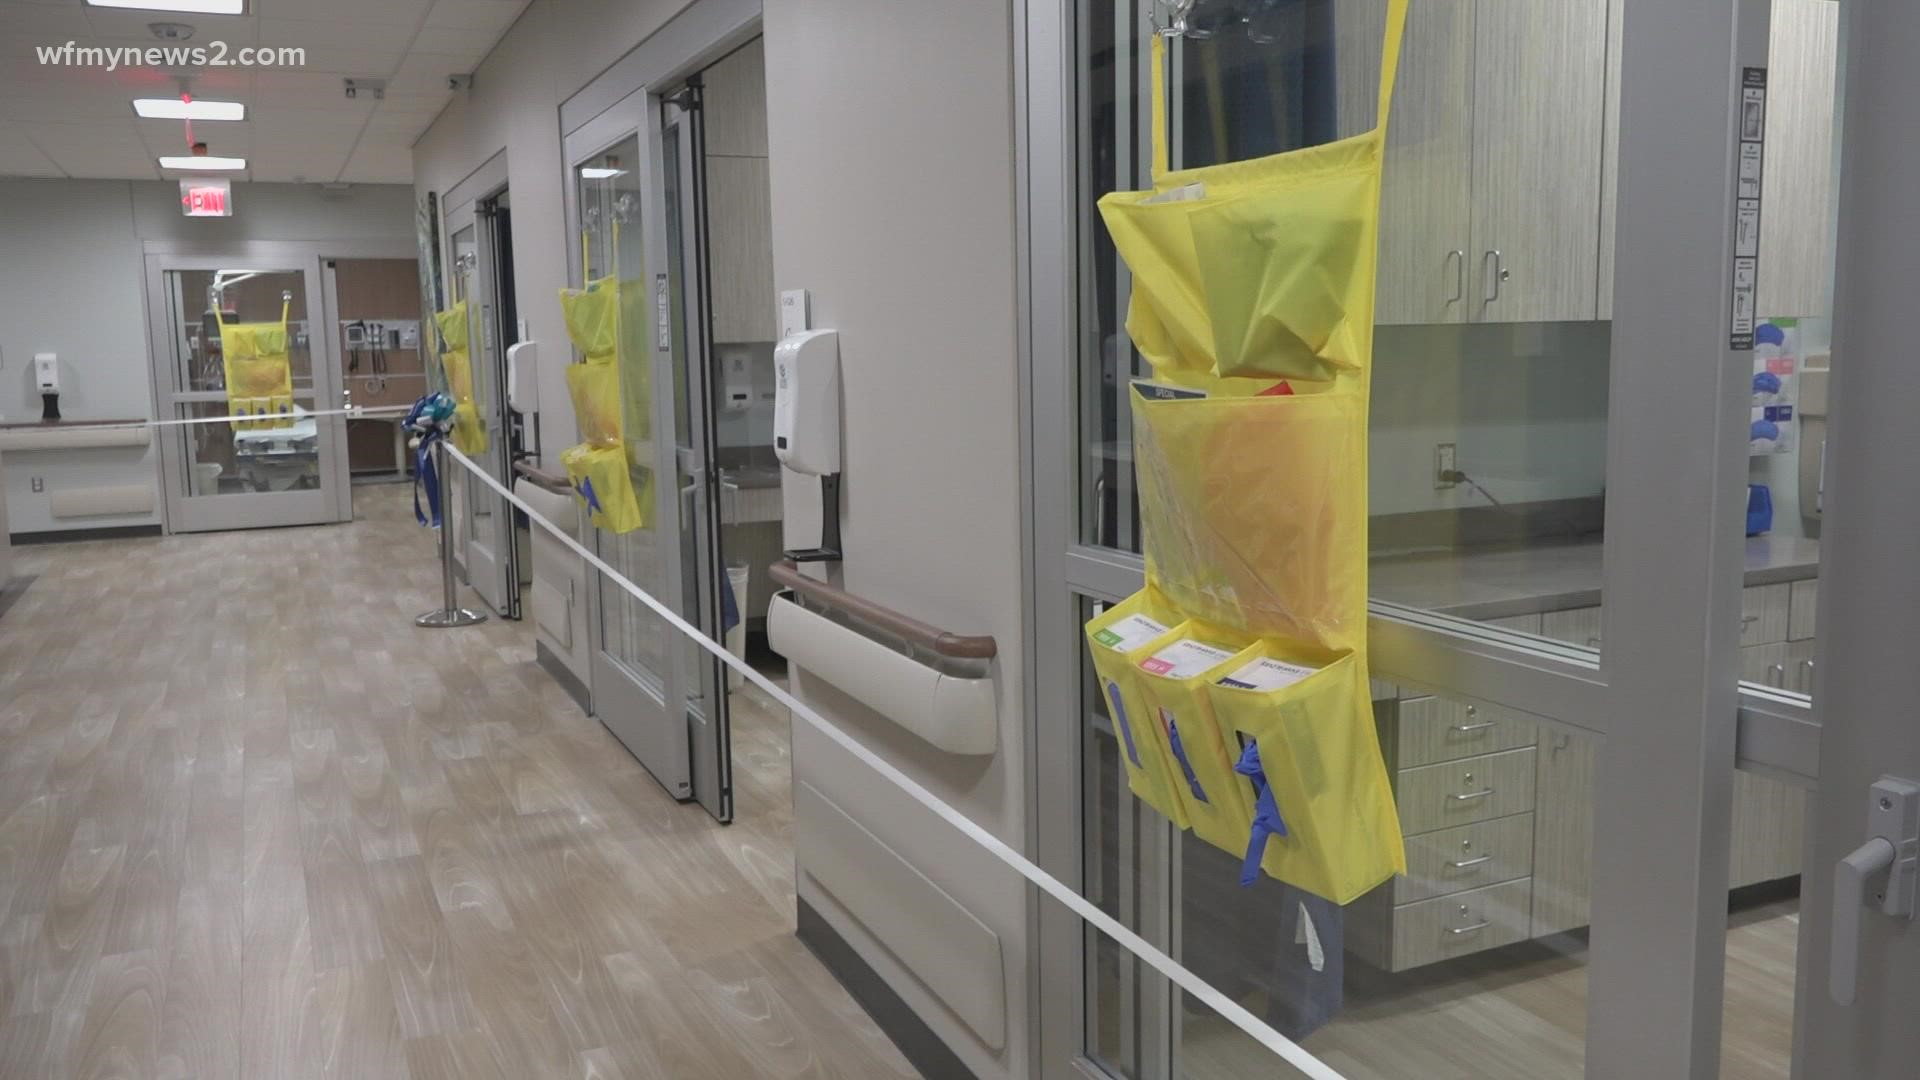 The department has 16 treatment rooms that are supported by 24/7 imaging, pharmacy, and lab